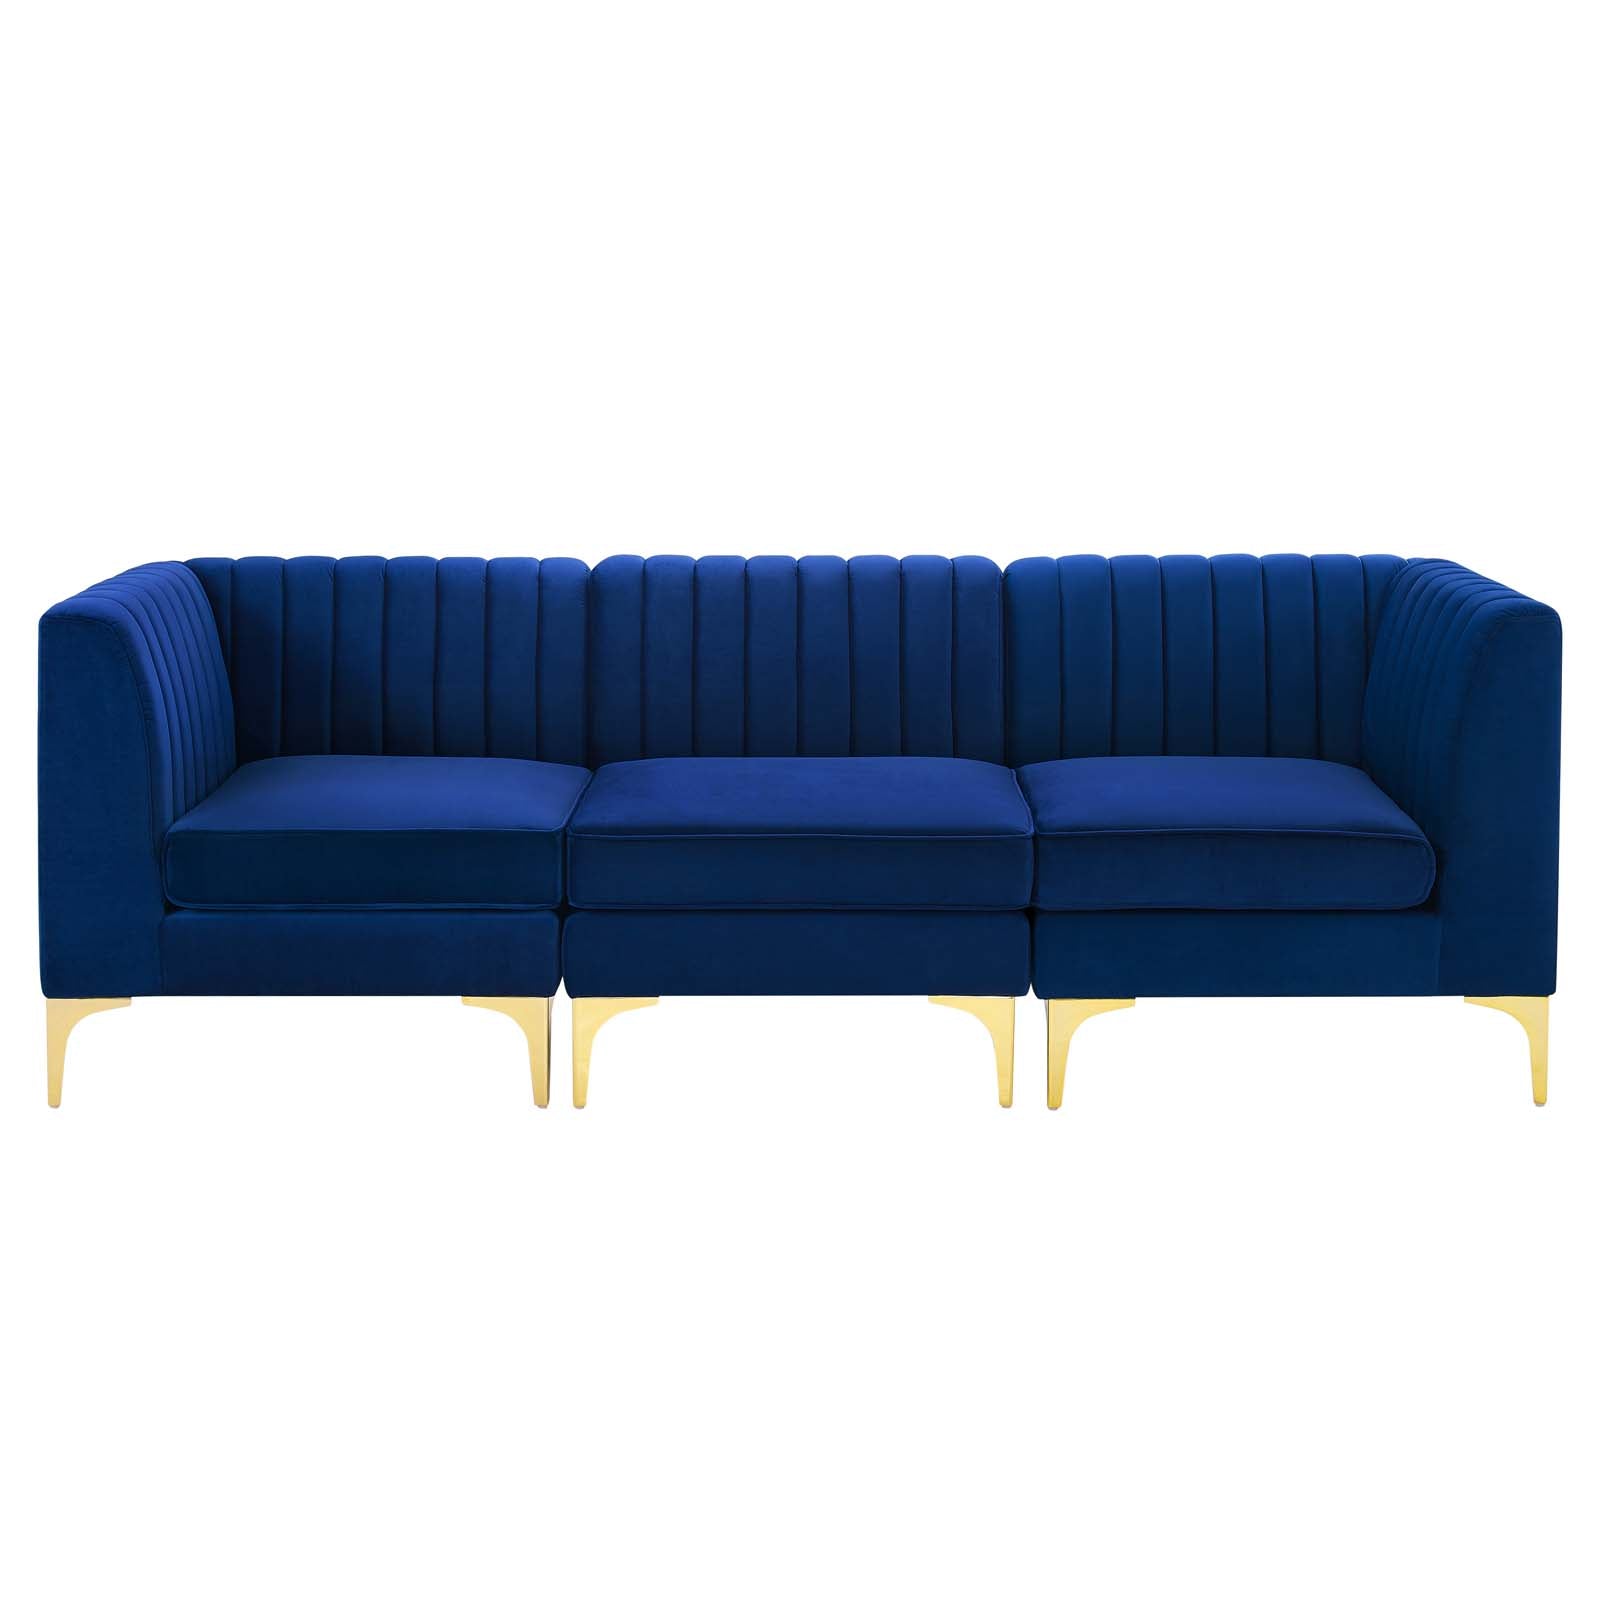 Modway Sofas & Couches - Triumph Channel Tufted Performance Velvet 3-Seater Sofa Navy